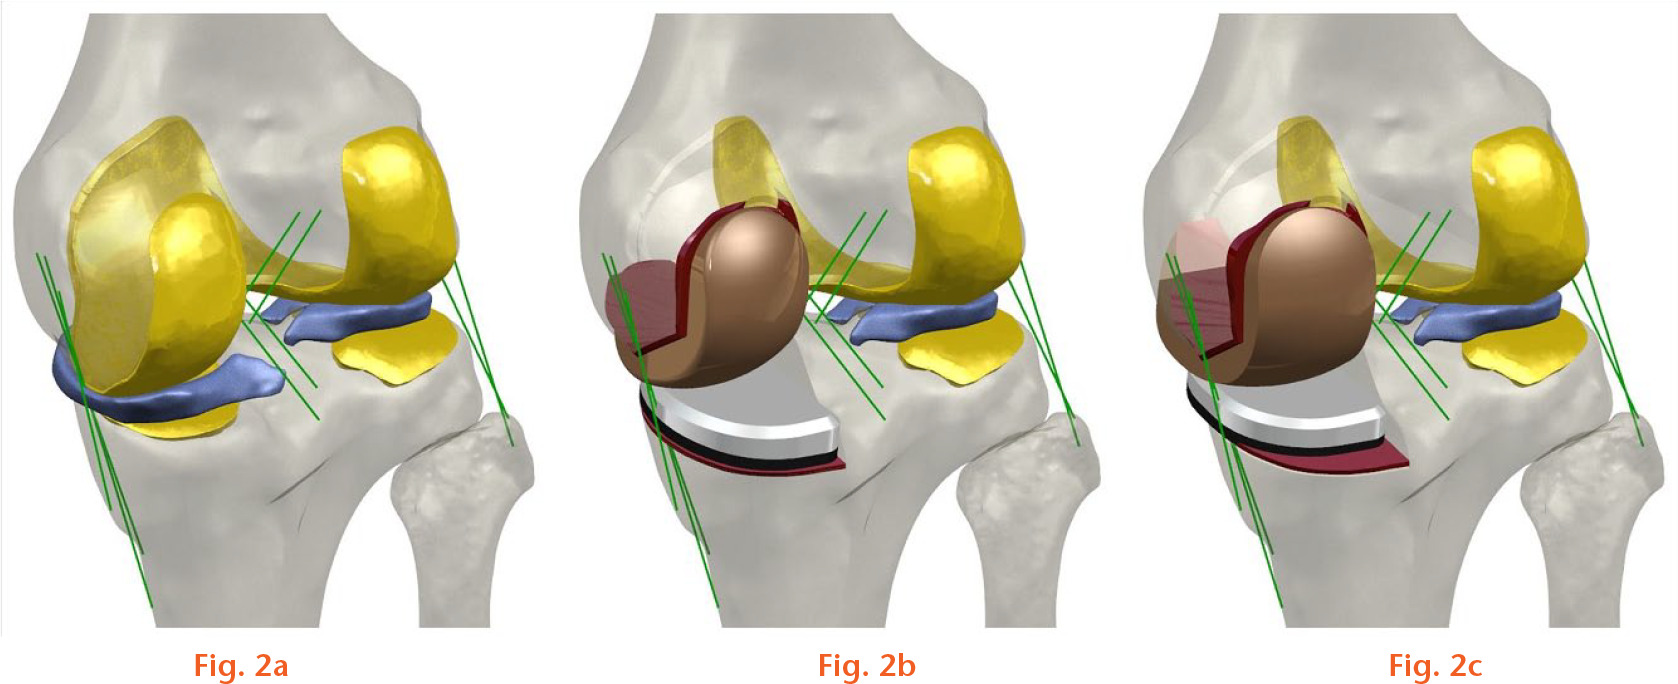  
            Finite element models used in the analysis: (a) normal knee; (b) patient-specific unicompartmental knee arthroplasty (UKA); and (c) standard UKA.
          